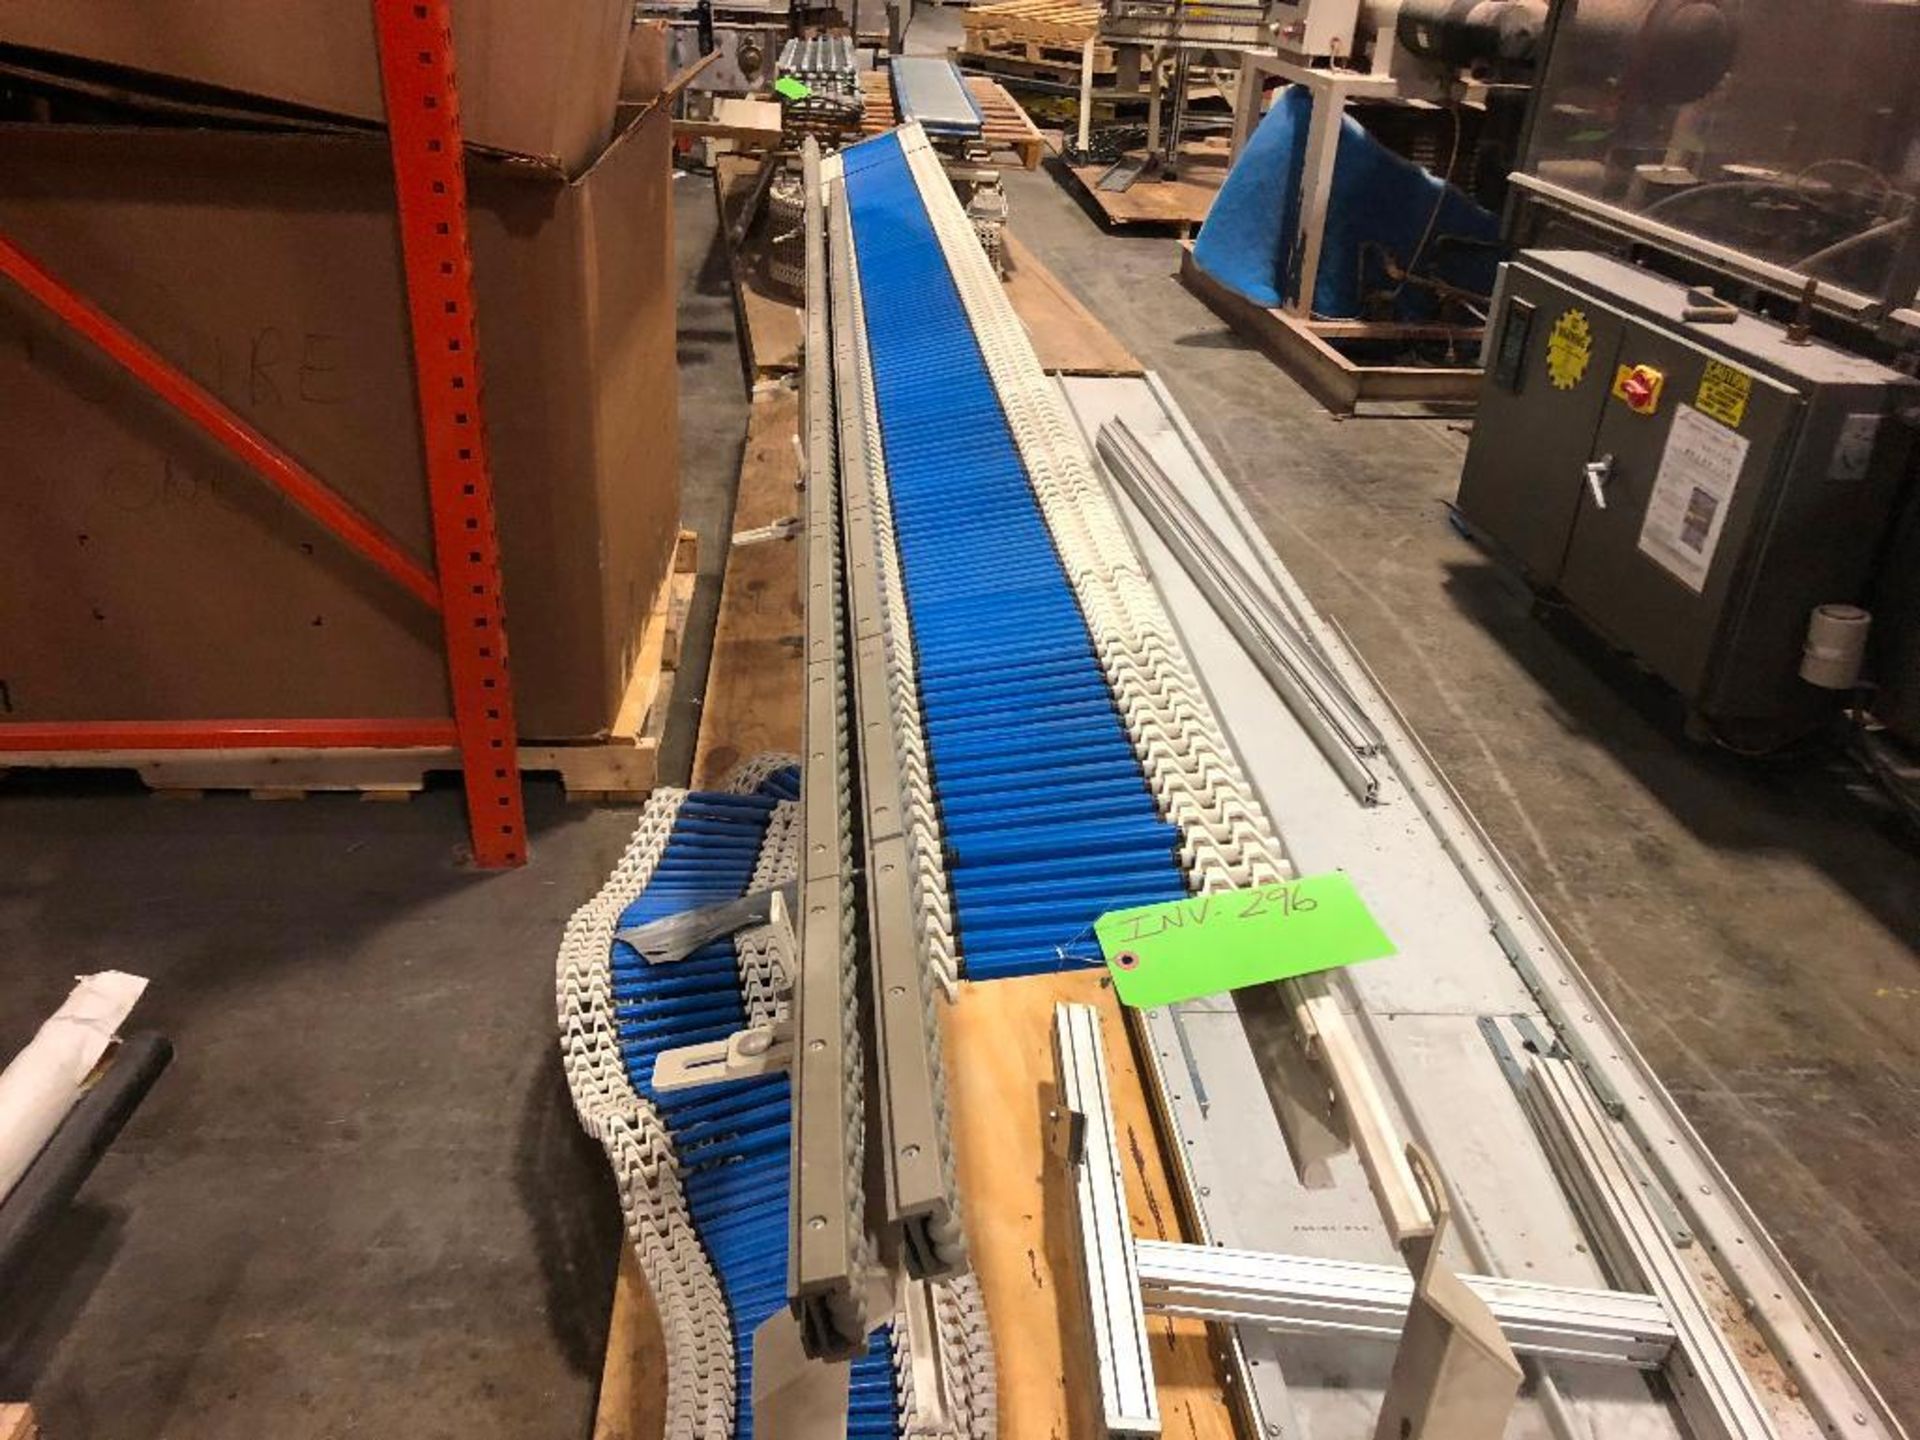 Spantech mild steel conveyor frame only, 14 ft. long x 11 in. wide x 31 in. tall, no drive, no sproc